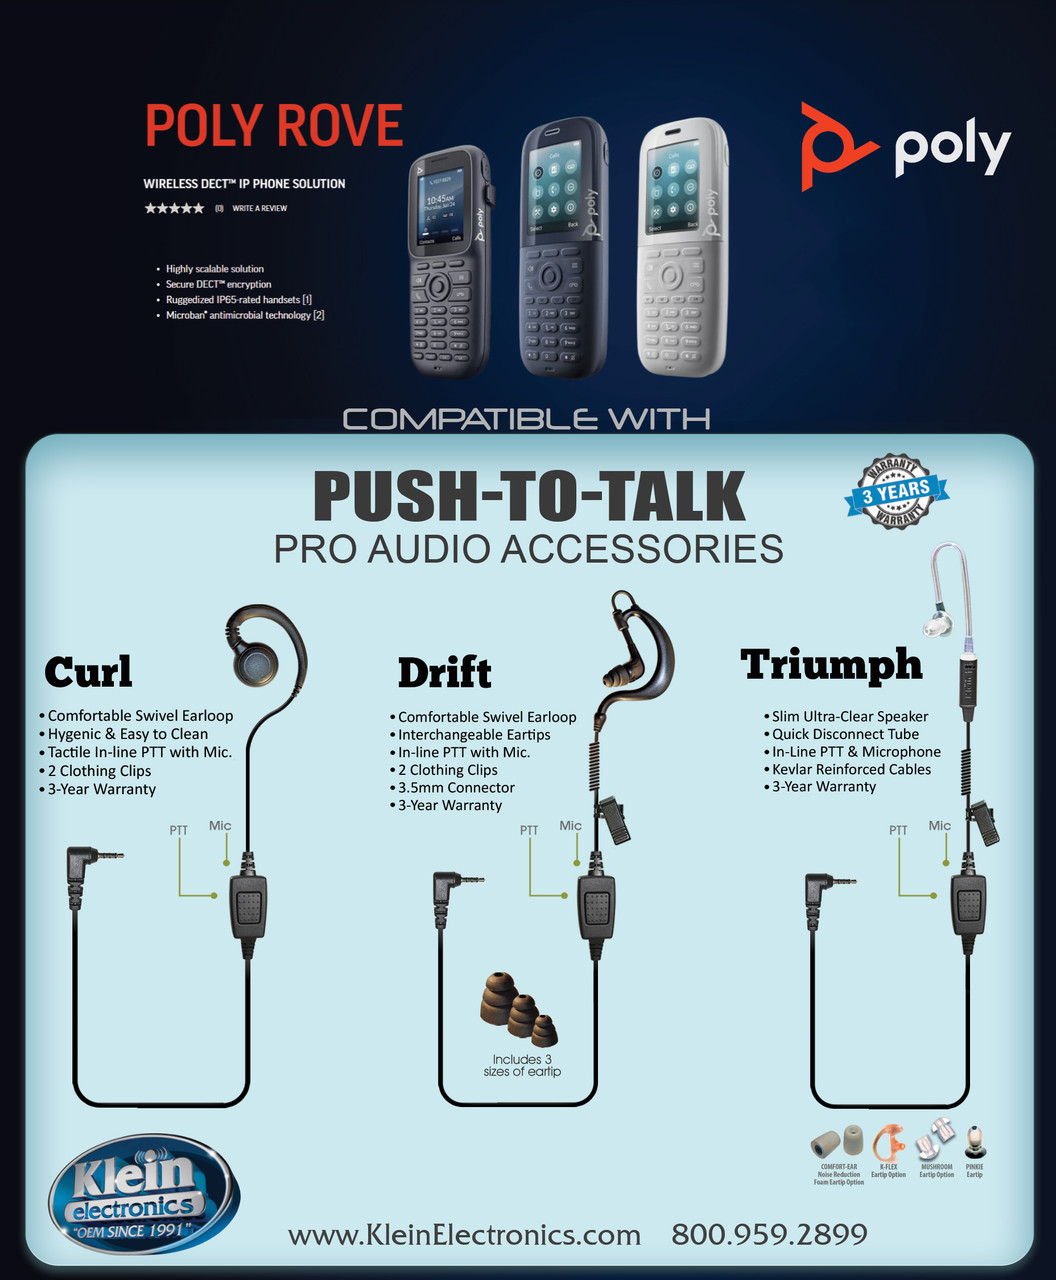 TRIUMPH 1-Wire PTT Earpiece (3.5mm pin) - Poly Rove [[product_type]] kleinelectronics.com 74.95